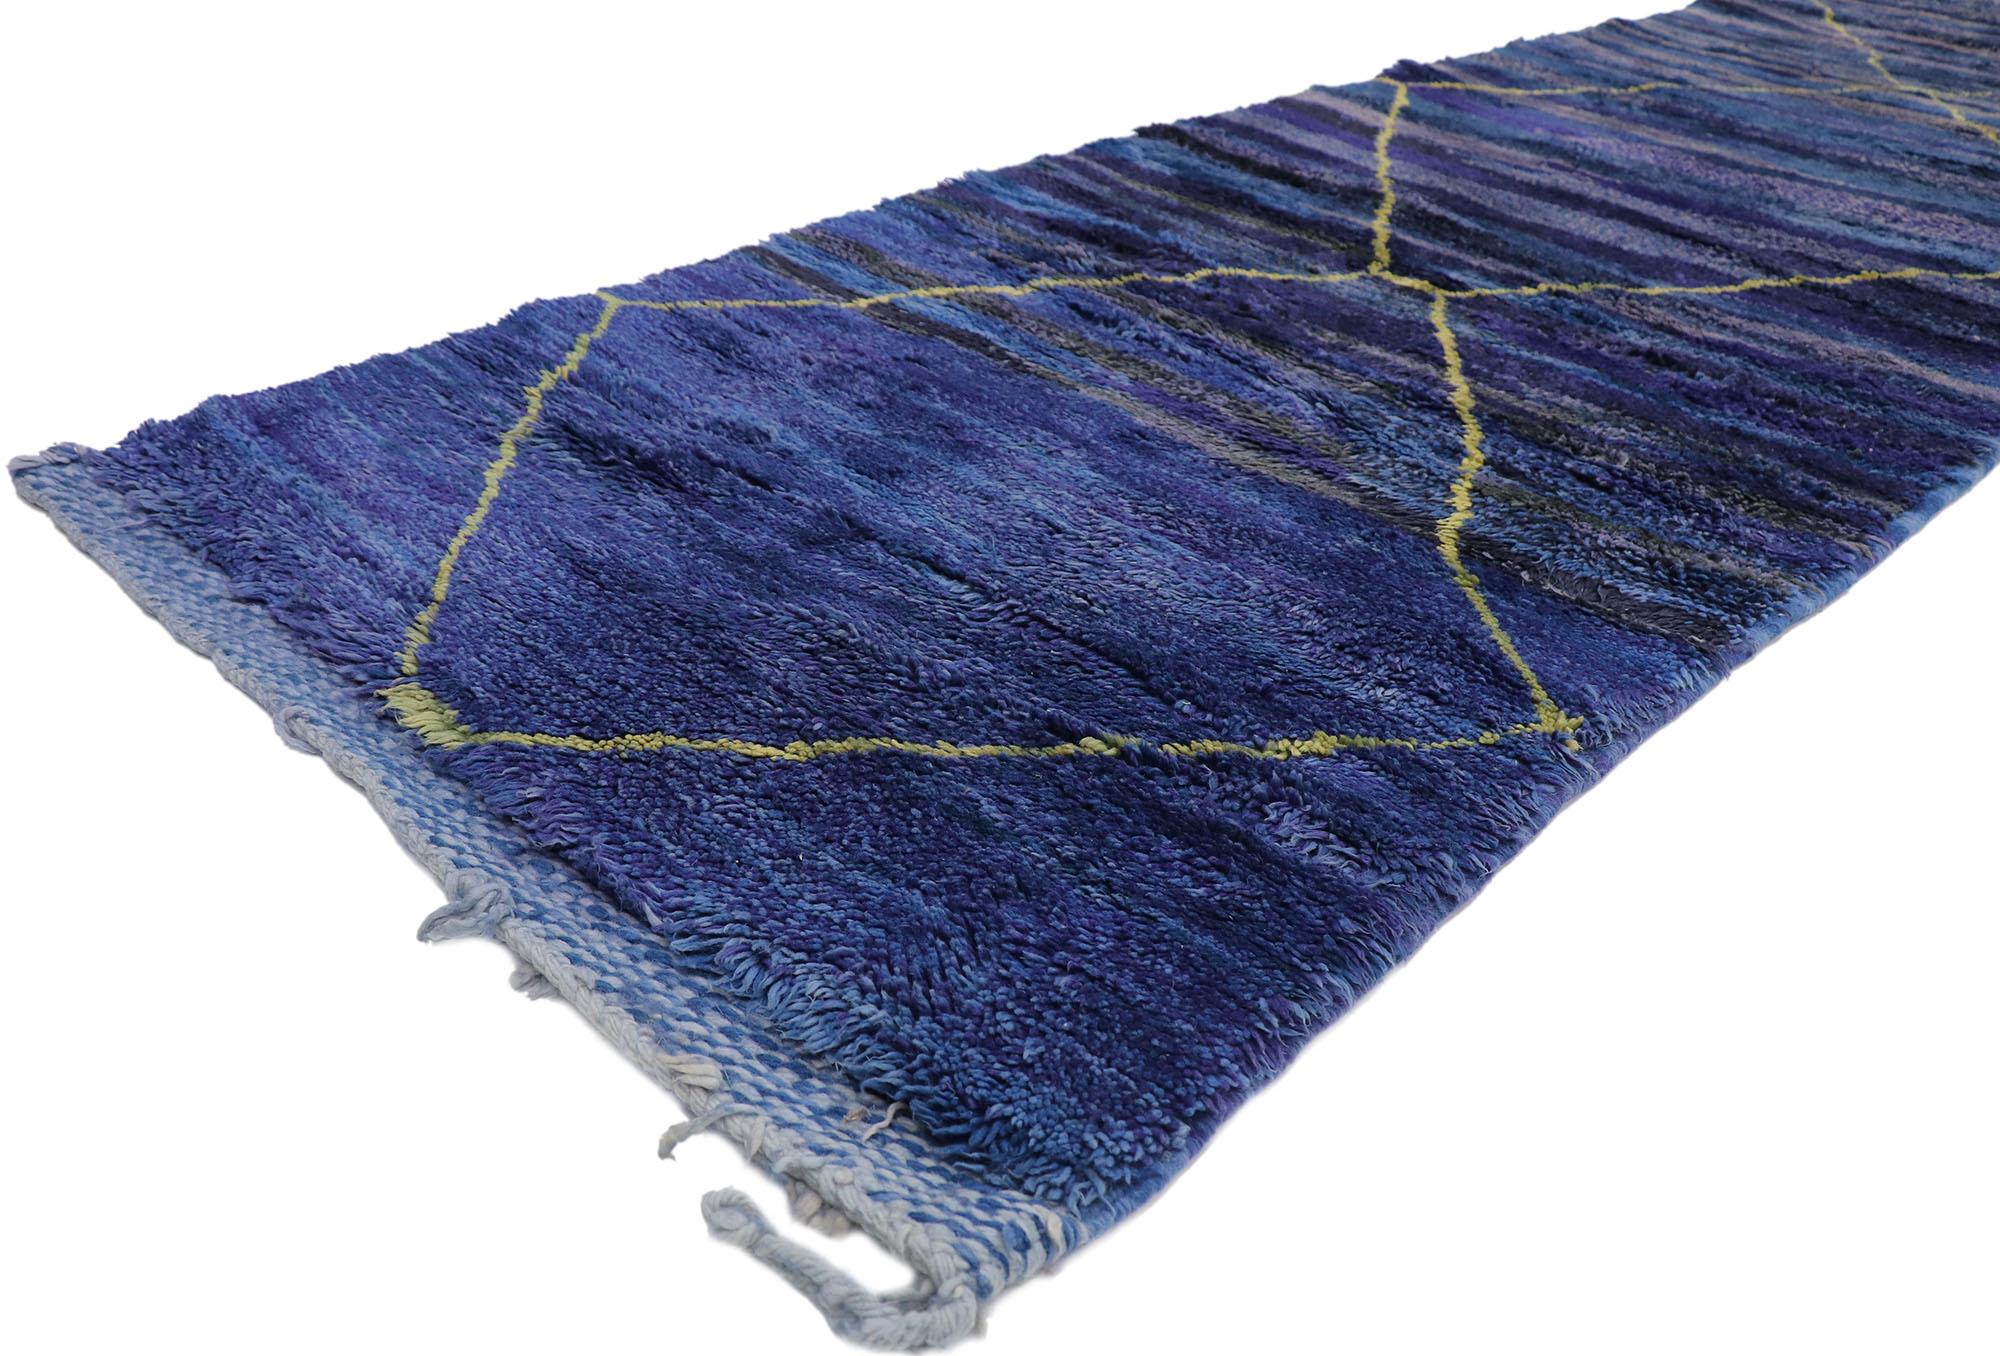 21135 New Long Blue Moroccan Runner, 03'01 x 17'02.
Showcasing a bold expressive design, incredible detail and texture, this hand knotted wool extra-long blue Moroccan runner is a captivating vision of woven beauty. The bold geometric pattern and